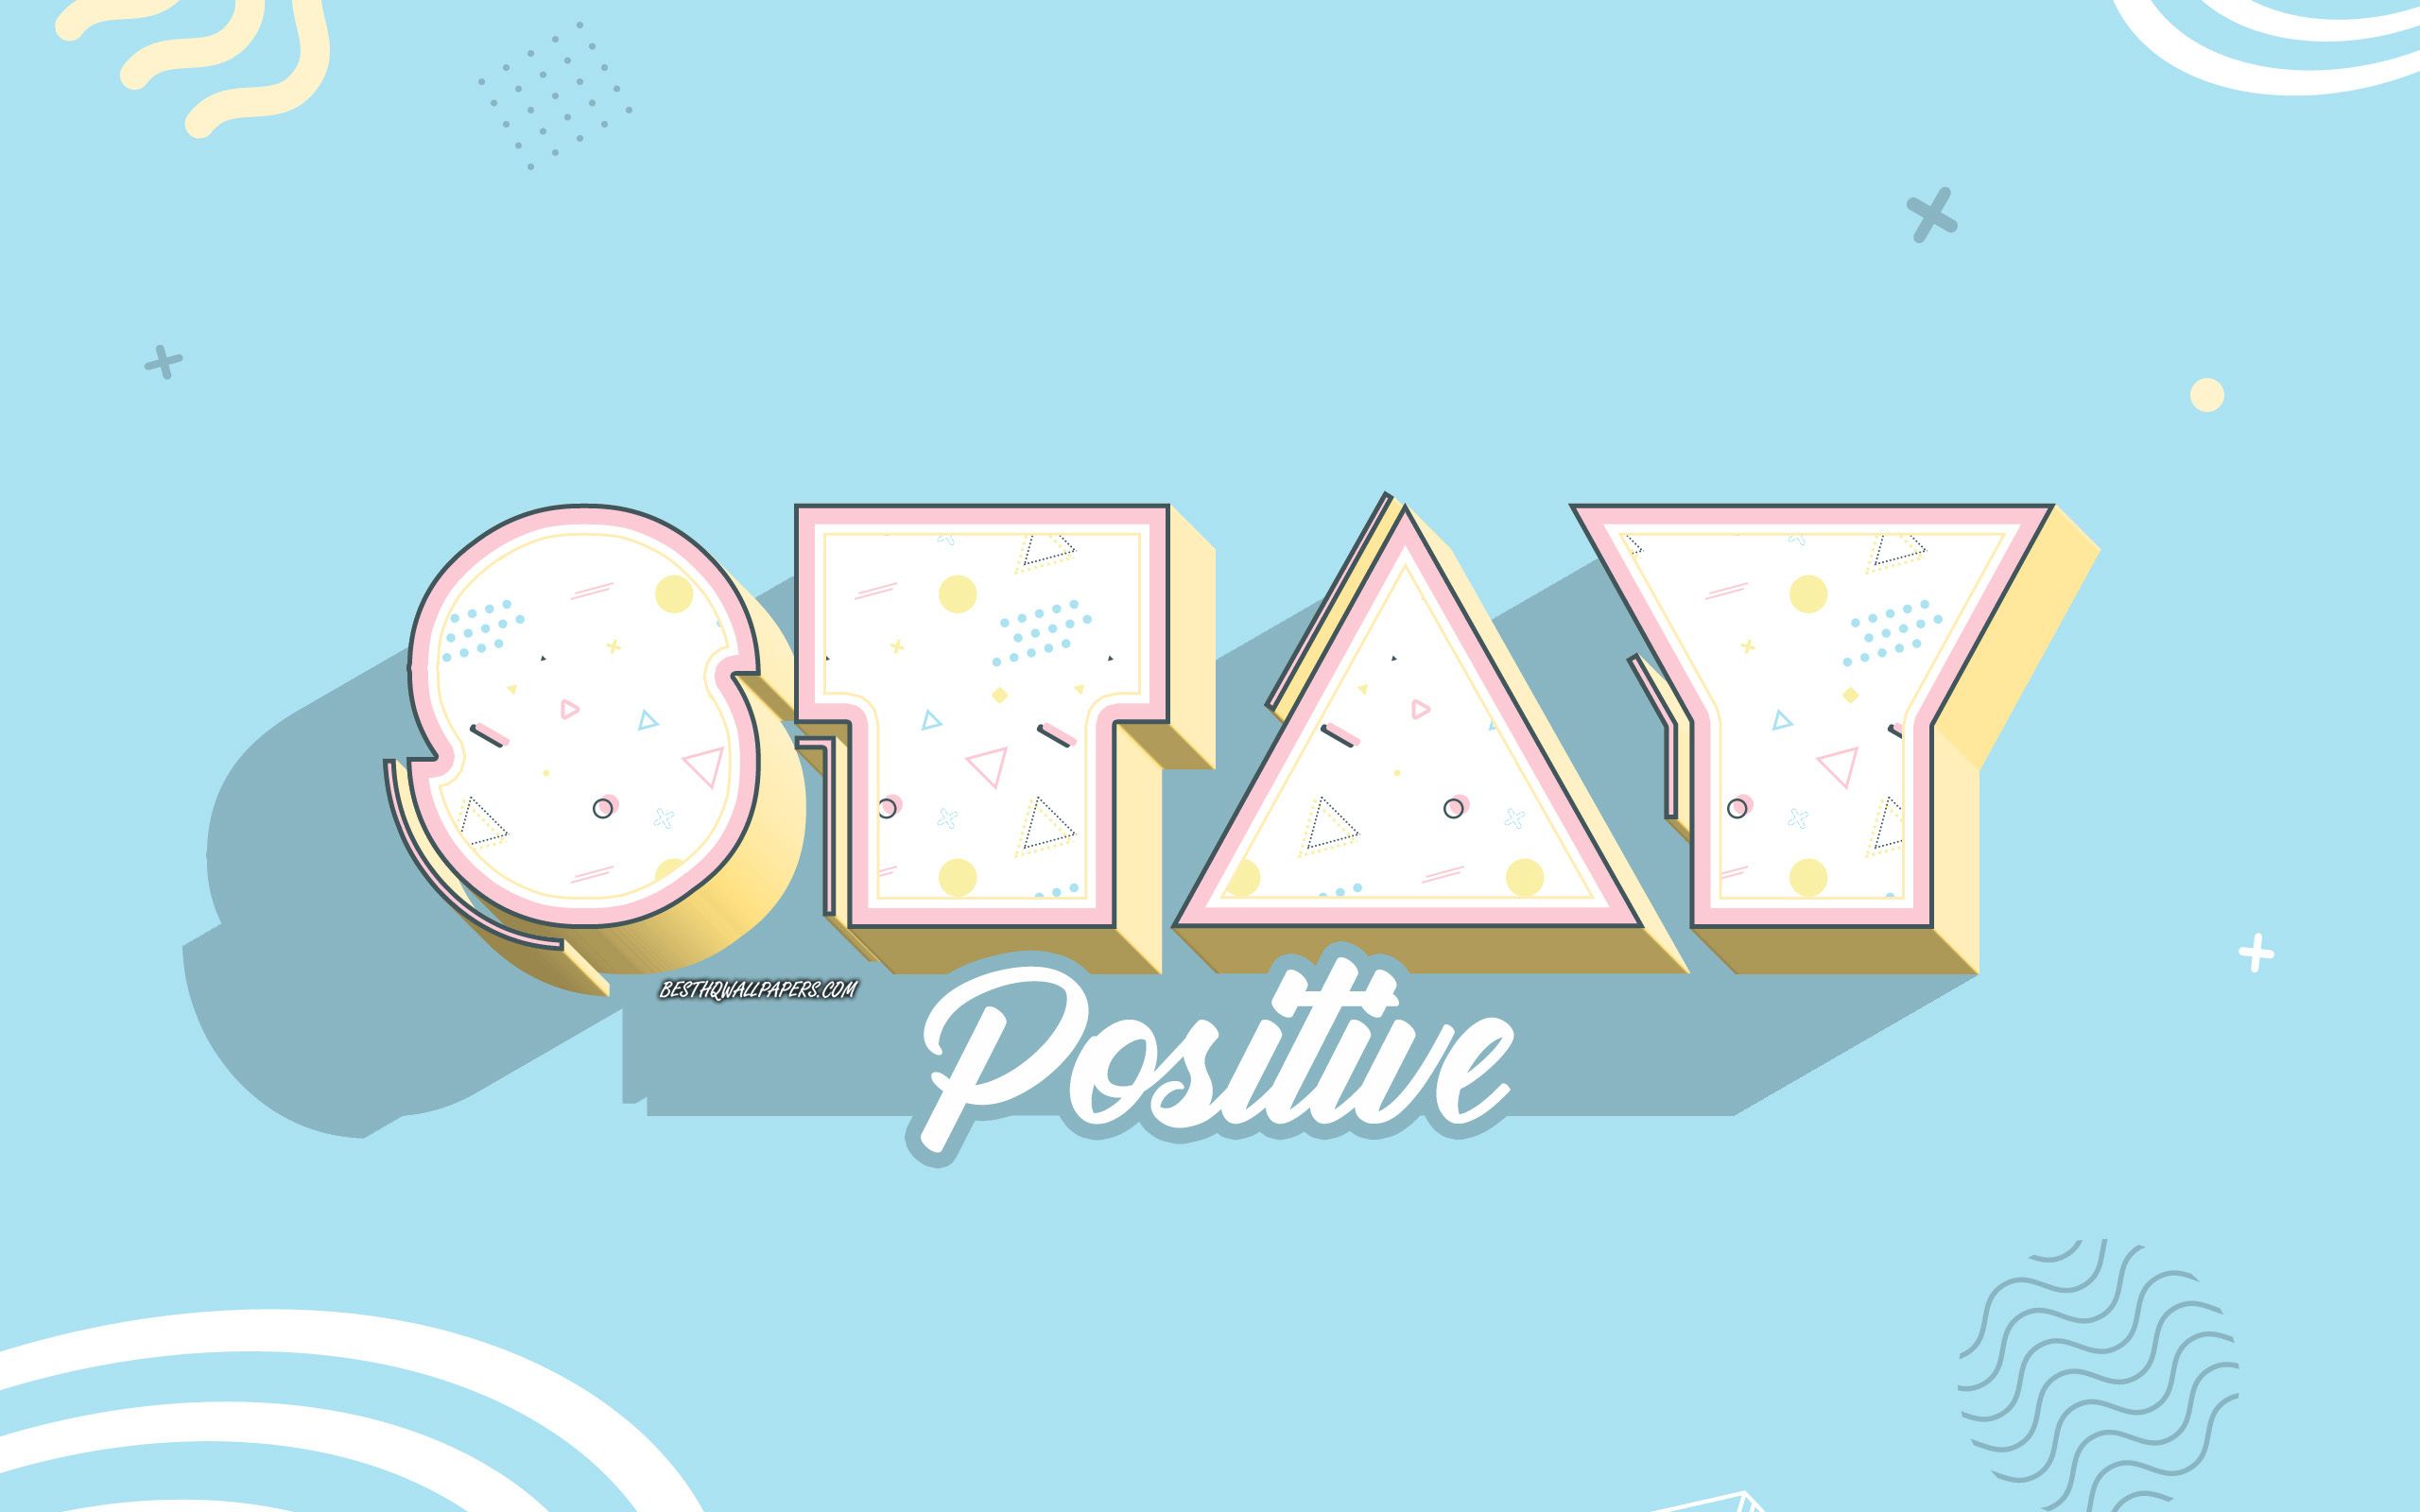 Download wallpaper Stay positive, blue creative background, positive messages, motivation, Stay positive concepts, 3D art, positive wishes for desktop with resolution 2560x1600. High Quality HD picture wallpaper